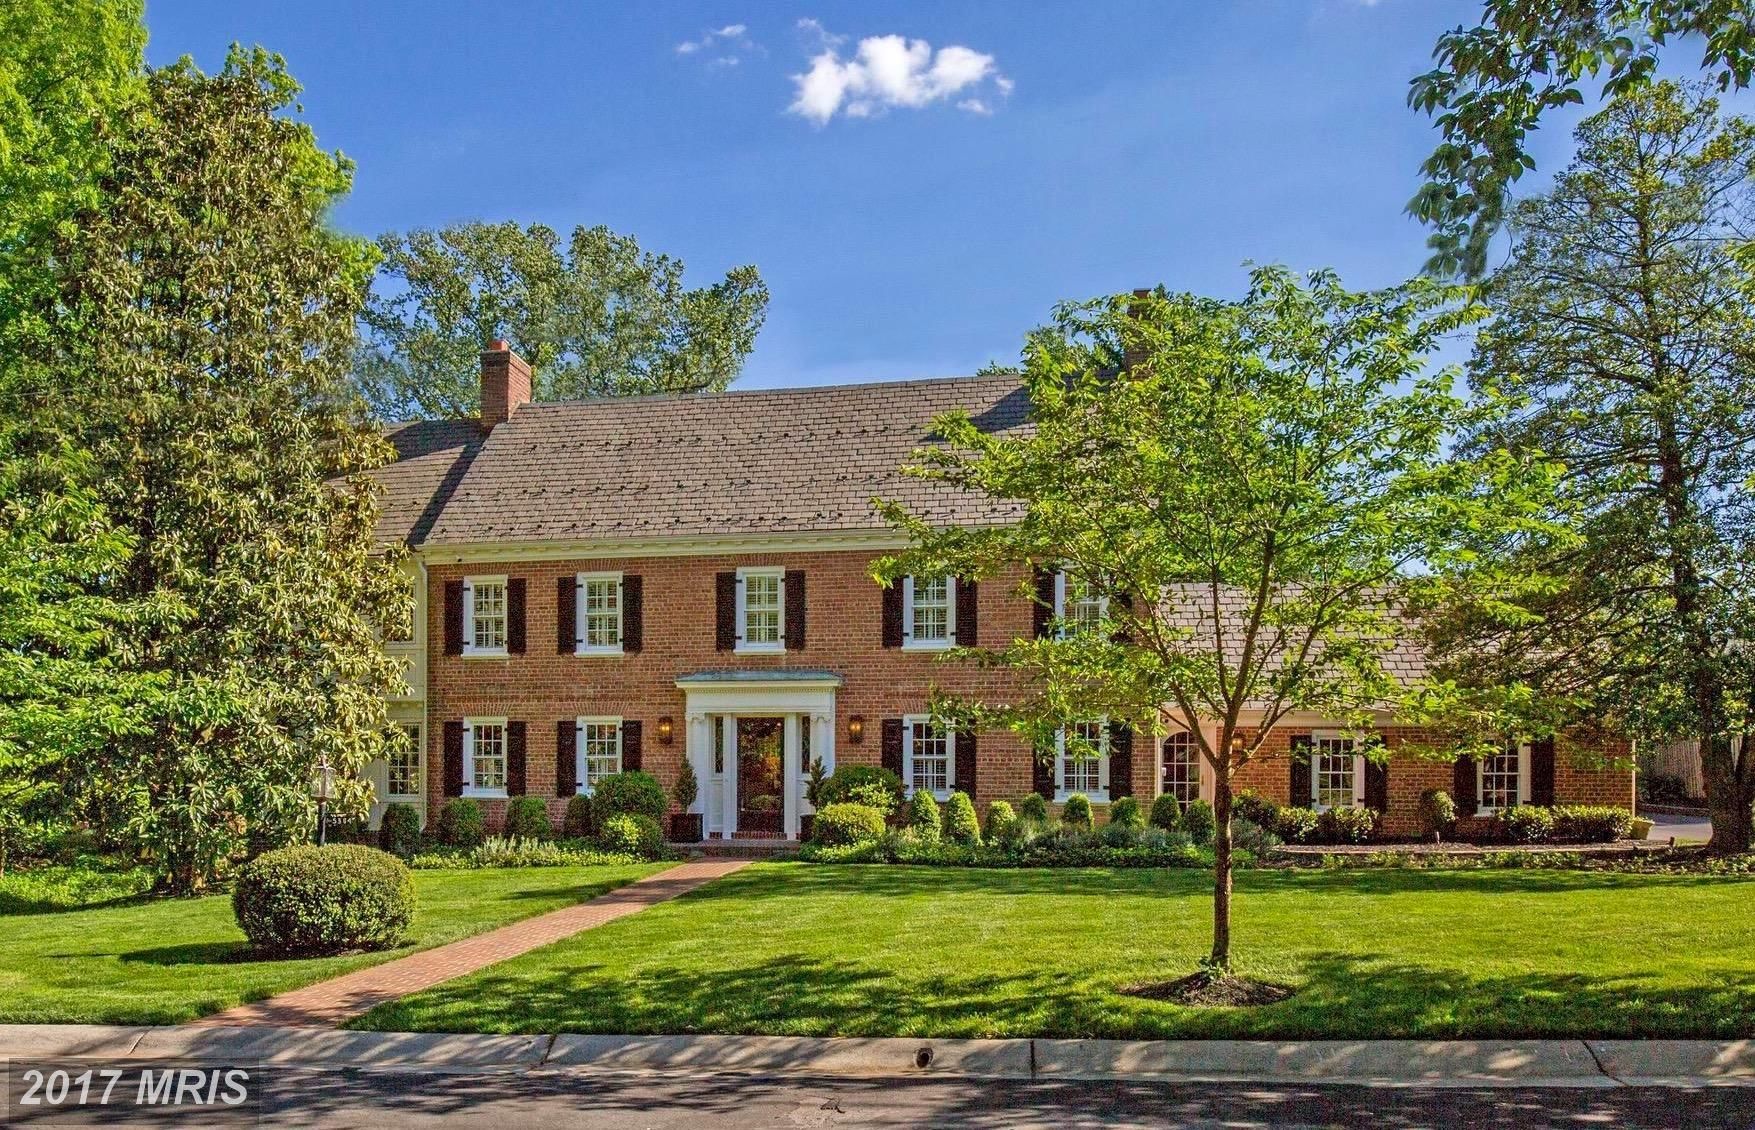 5304 Sunset Lane in Montgomery County sold for $3.325 million. (Courtesy Bright MLS)